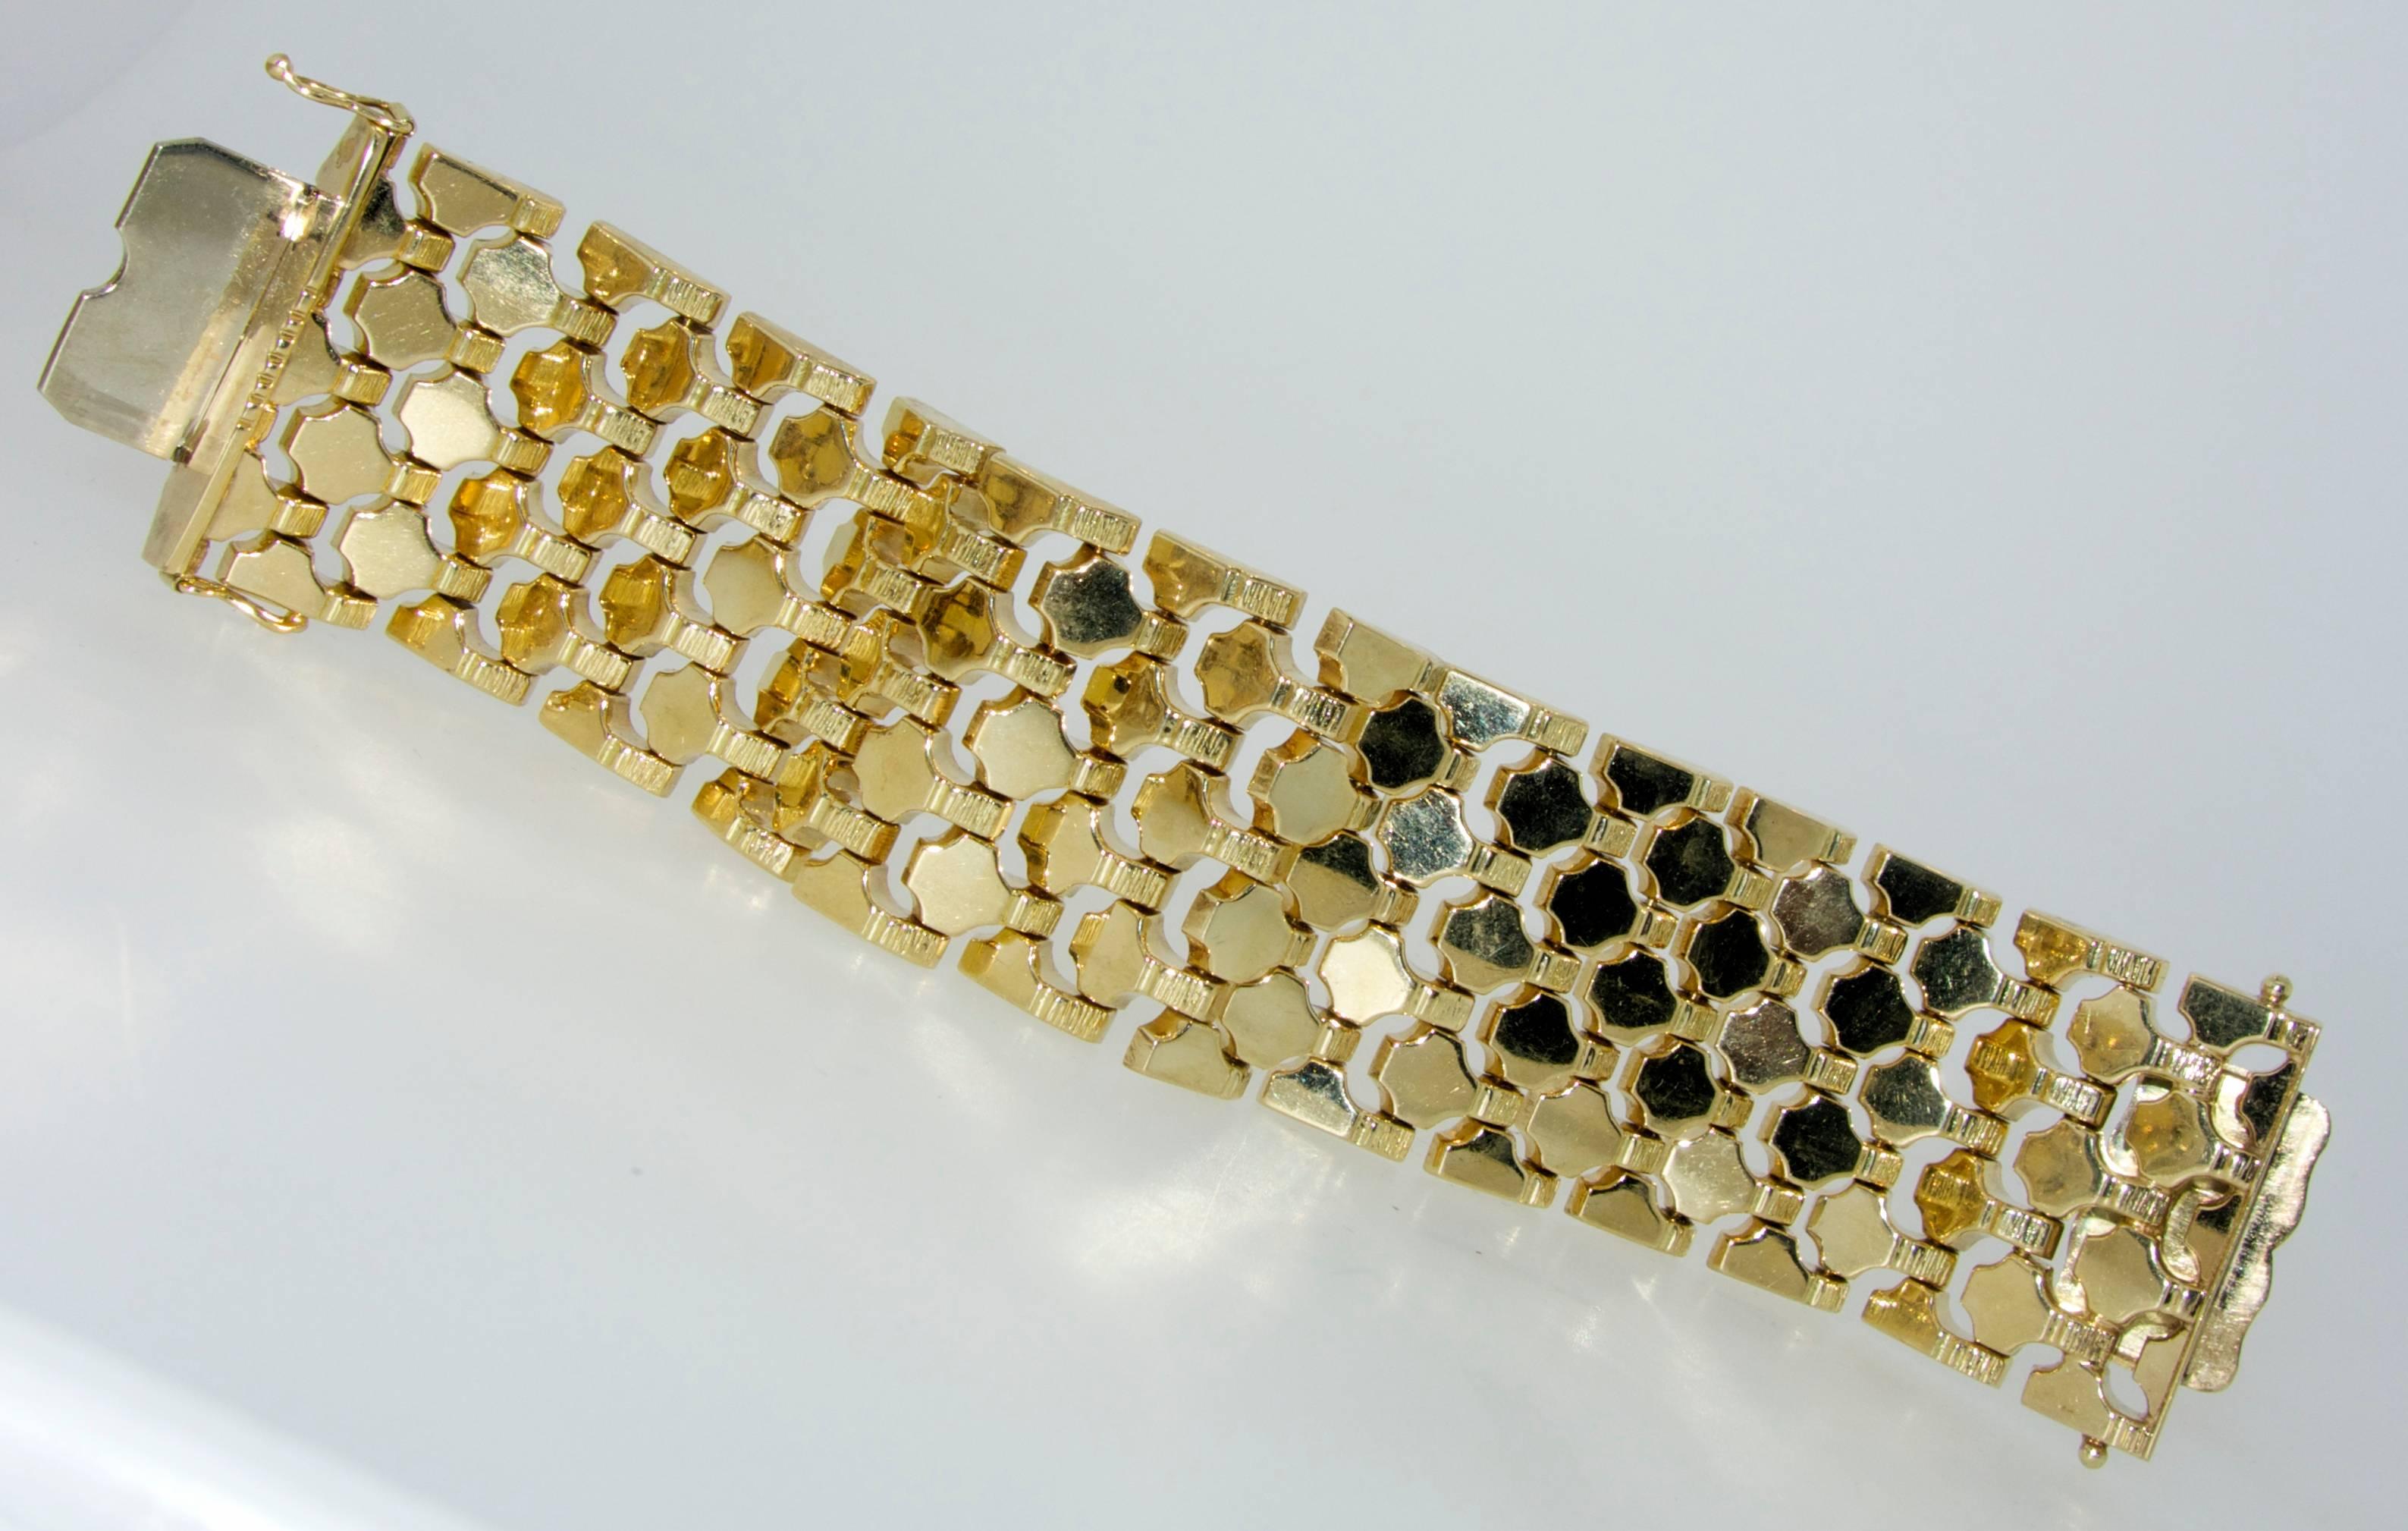 
The wide highly flexible polished gold bracelet can be worn separately or  can be seamlessly connectedwith the matching gold belt.  The bracelet and belt combined have a length of 33 inches. The bracelet is 6.5 inches long alone and the belt 